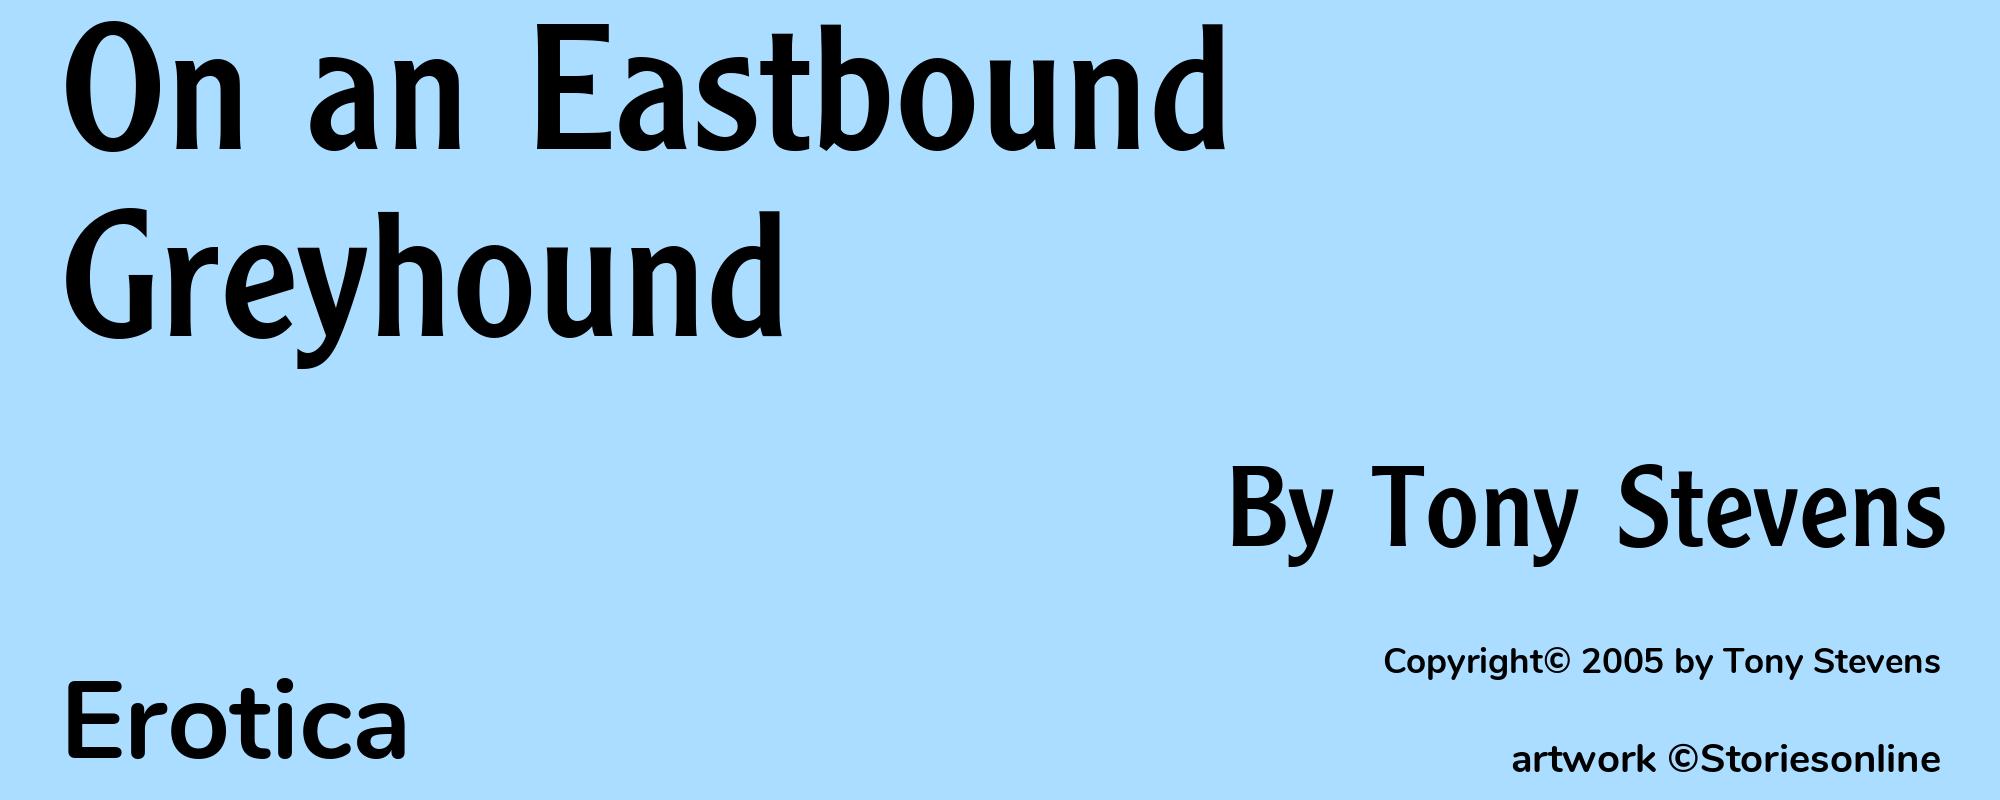 On an Eastbound Greyhound - Cover